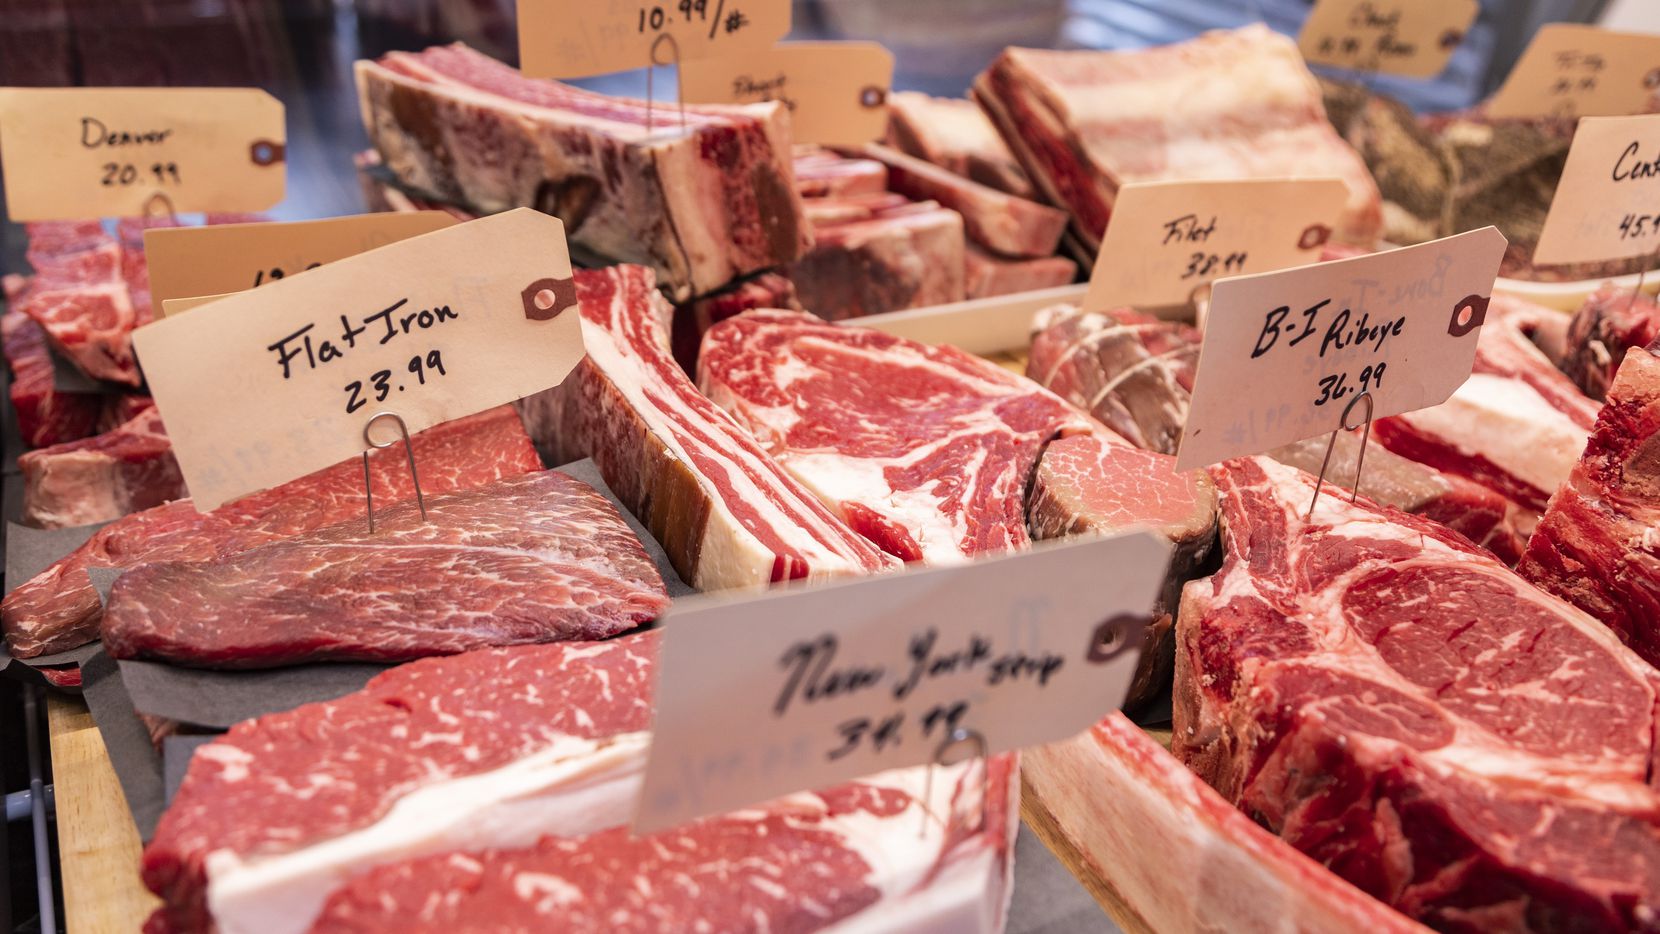 While Custom Meats will likely become known for its beef cuts (pictured here), it also sells...